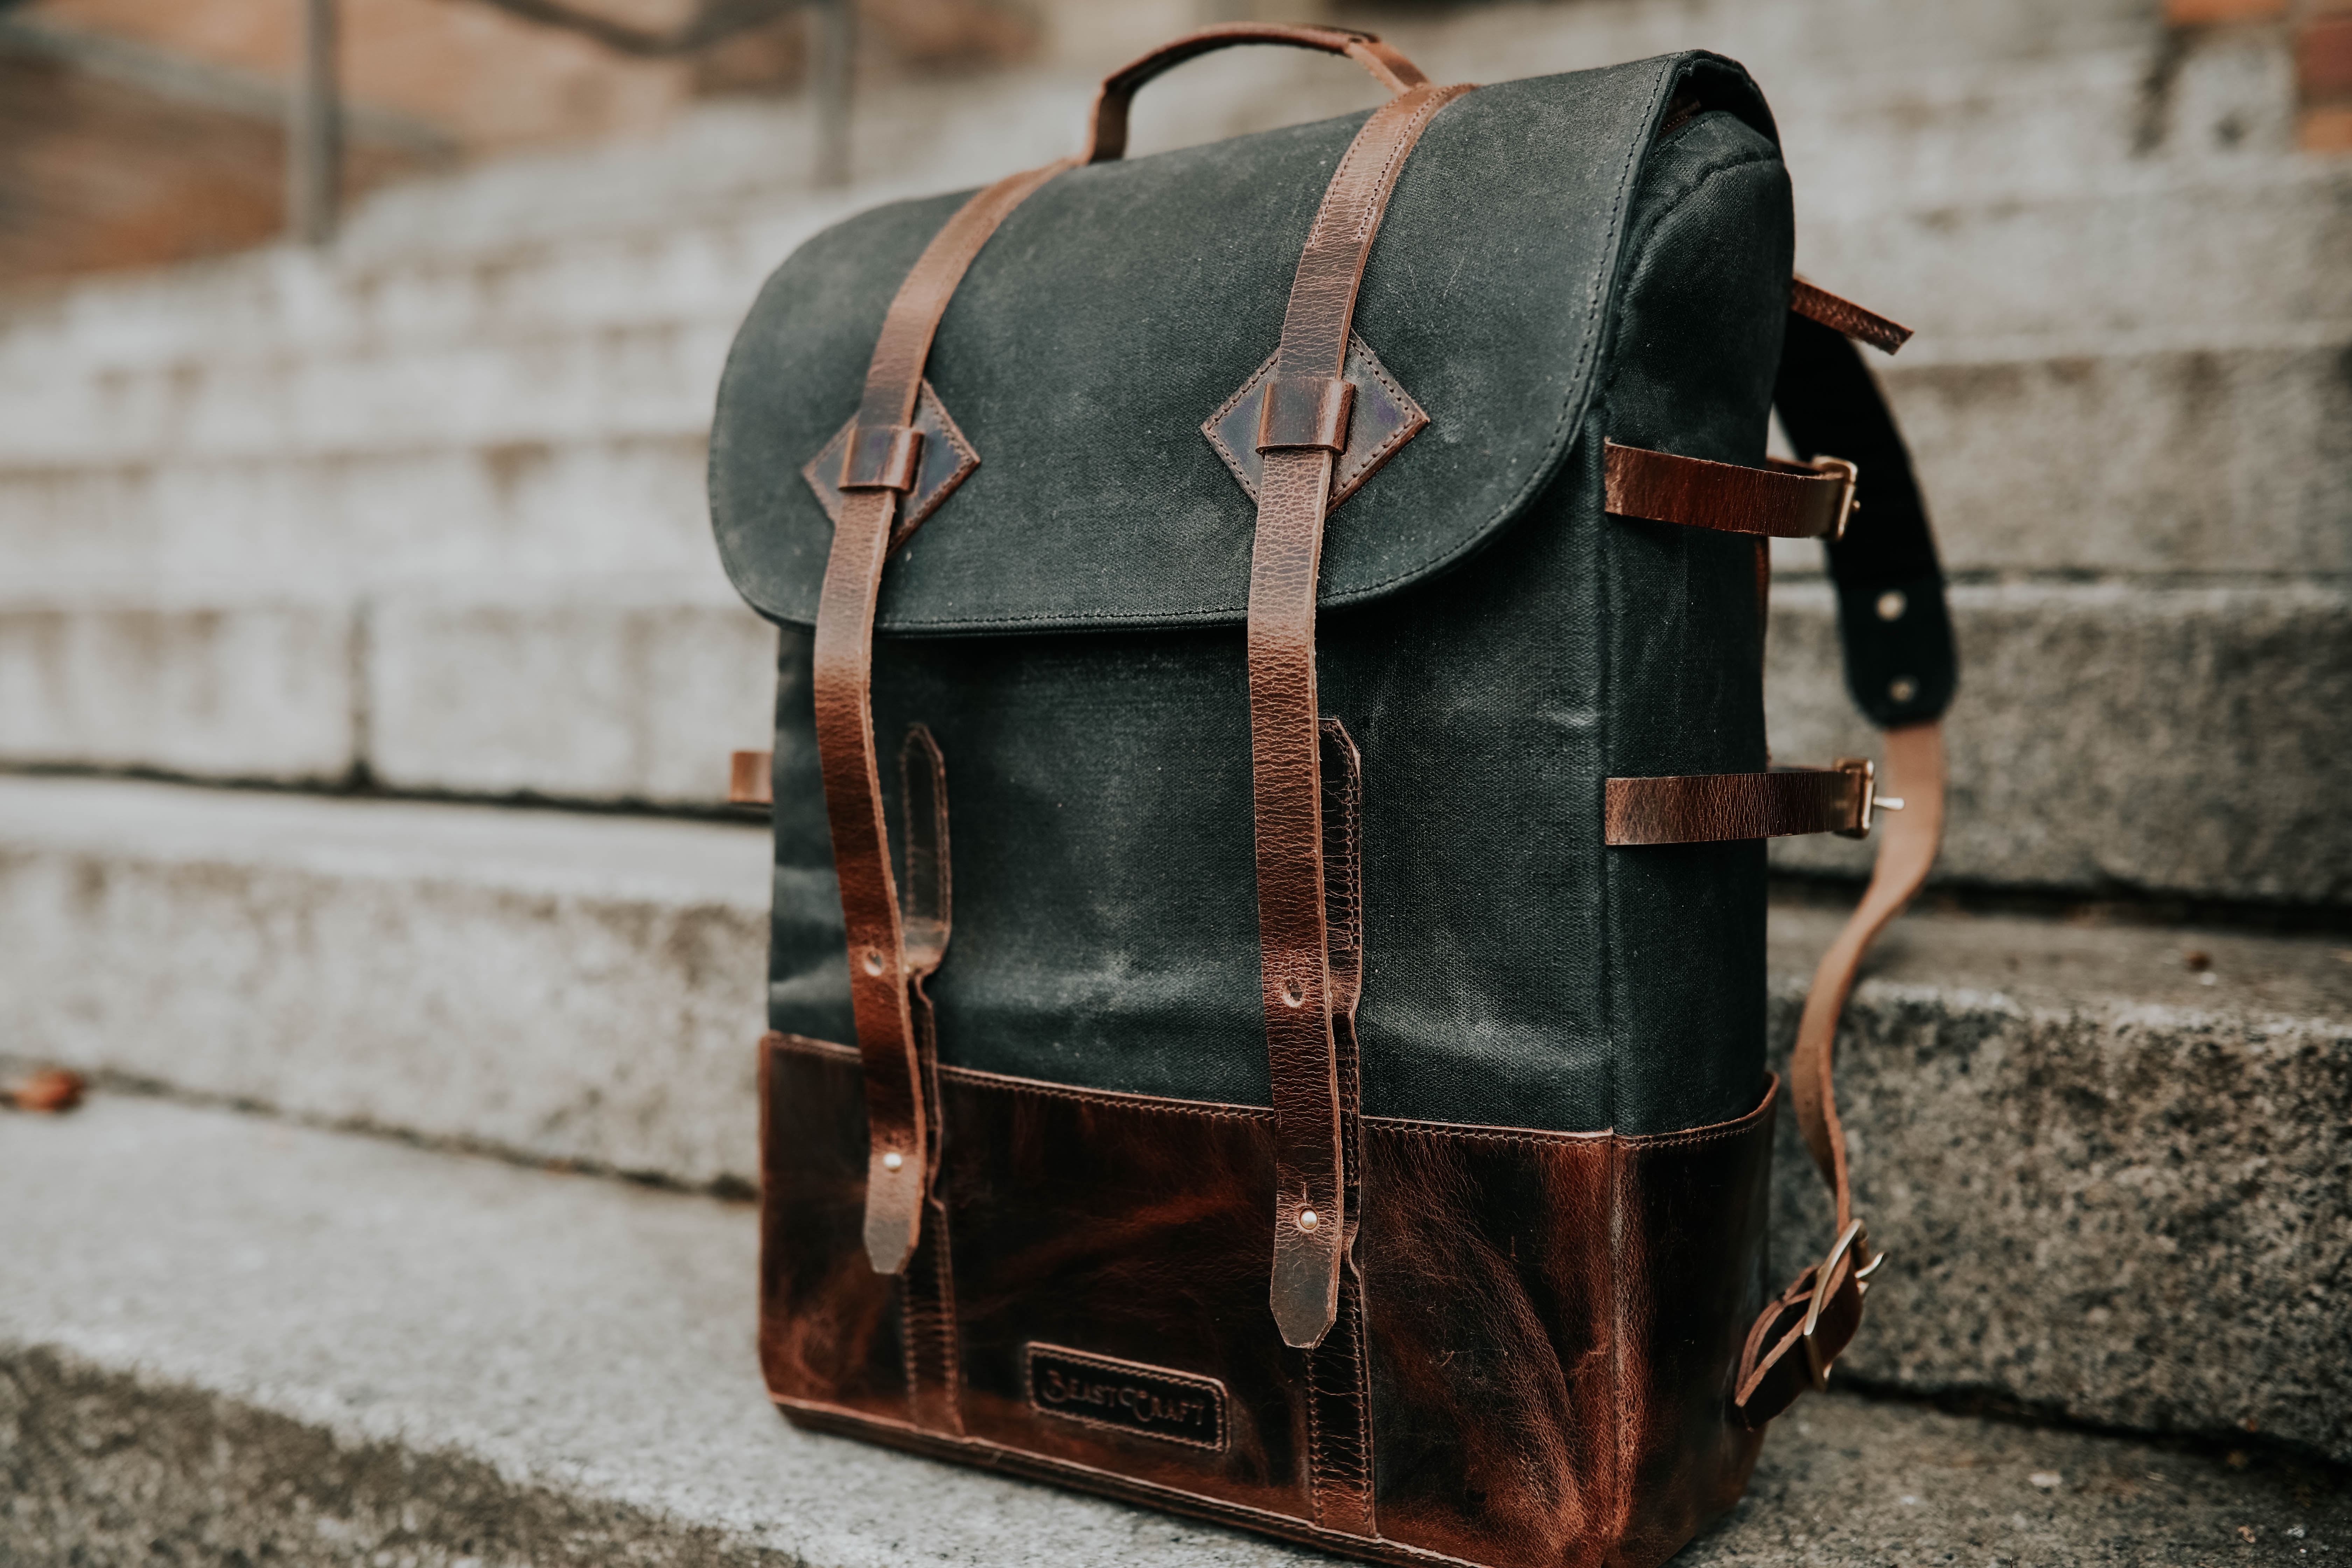 Backpack at the bottom of a set of stairs | Photo by Lina Verovaya on Unsplash